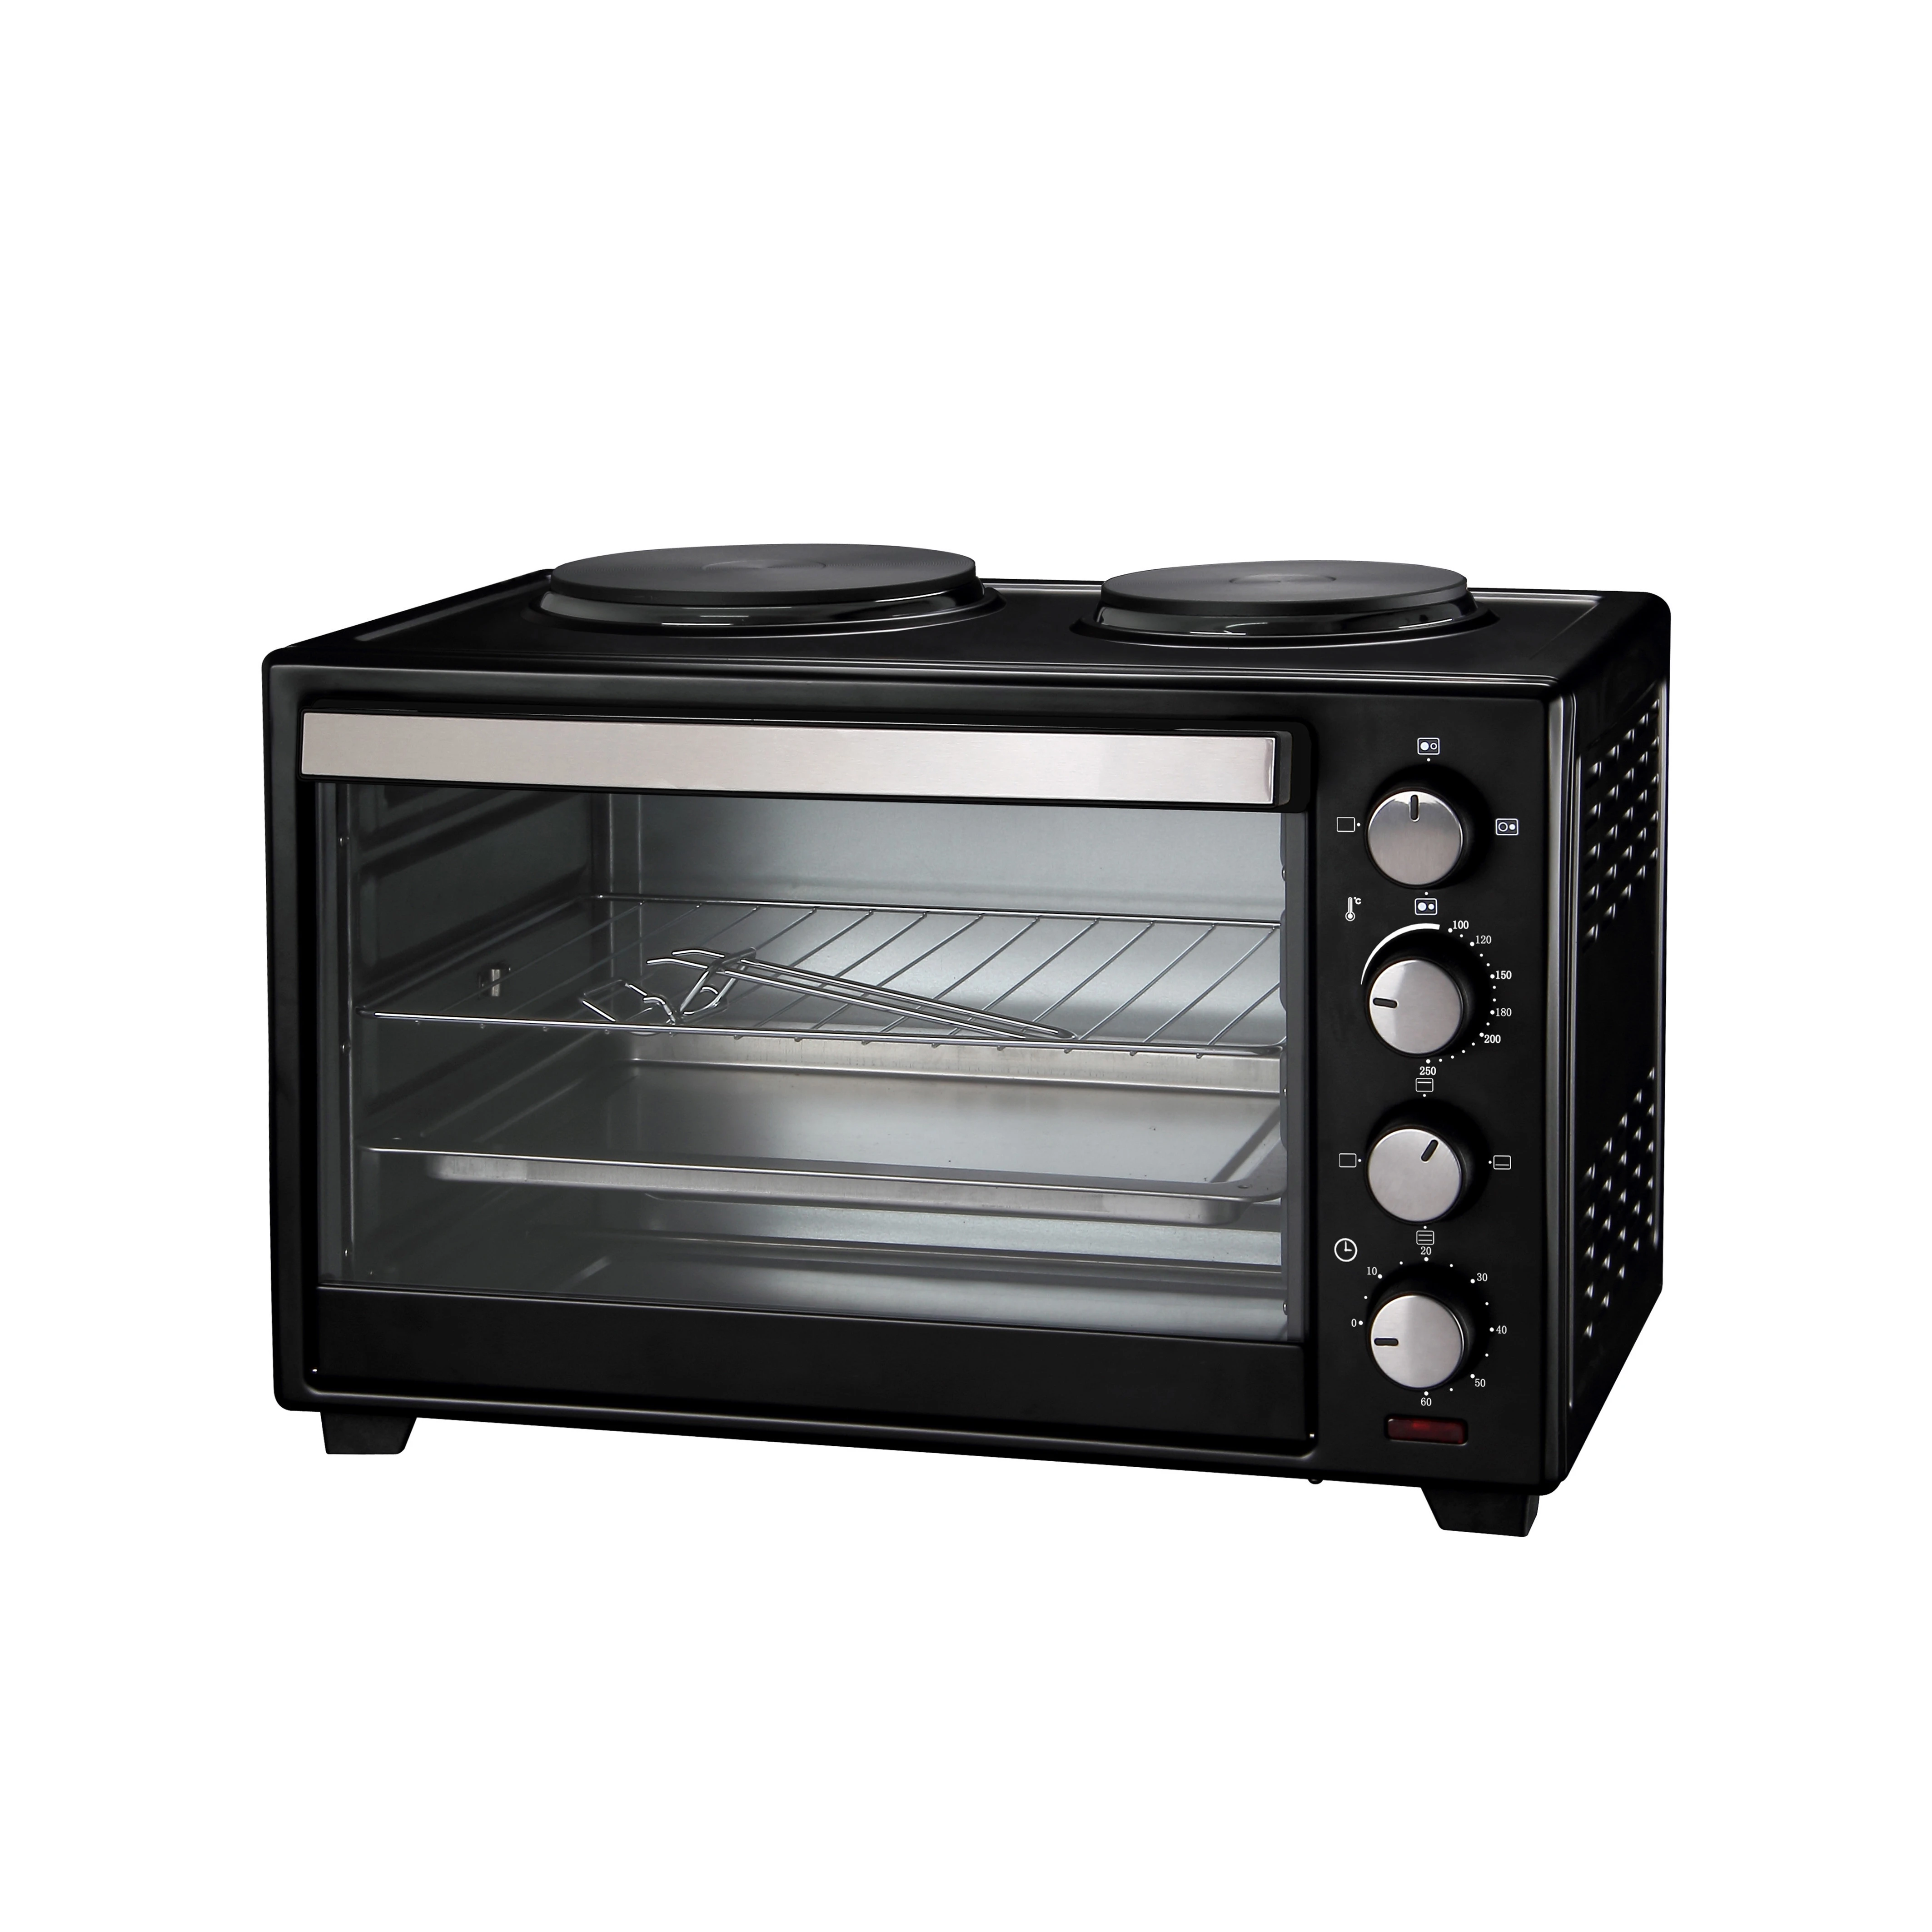 CB/CE approval 30L electric oven with hot plates